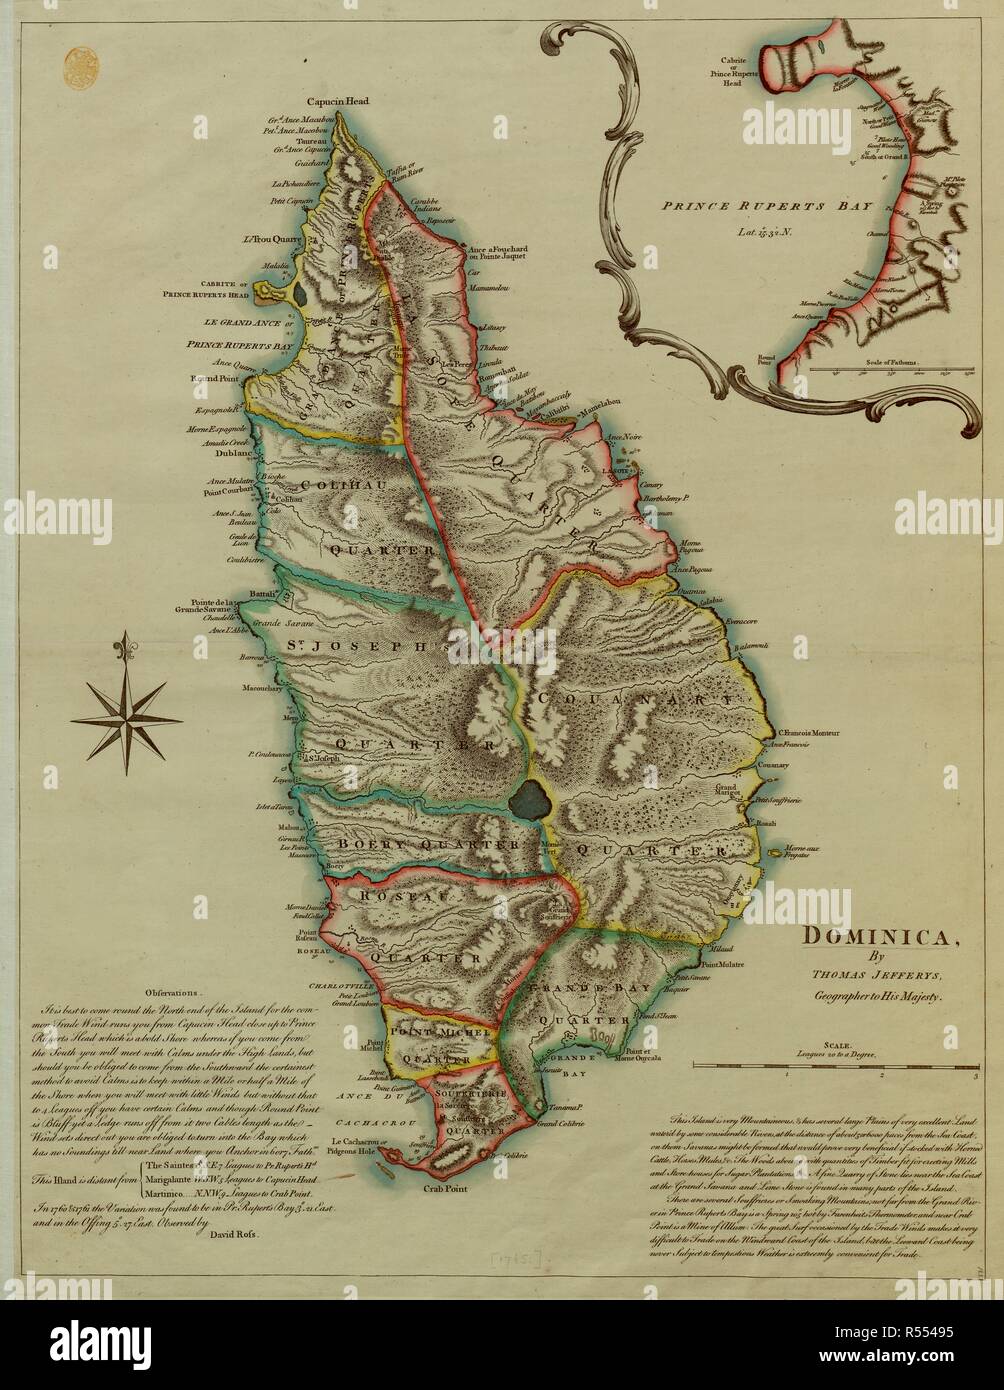 A map of Dominica. Dominica. By Thomas Jefferys. Scale, 3 leagues[ = 141 mm]. [London], [1765]. Source: Maps K.Top.123.94. Language: English. Stock Photo